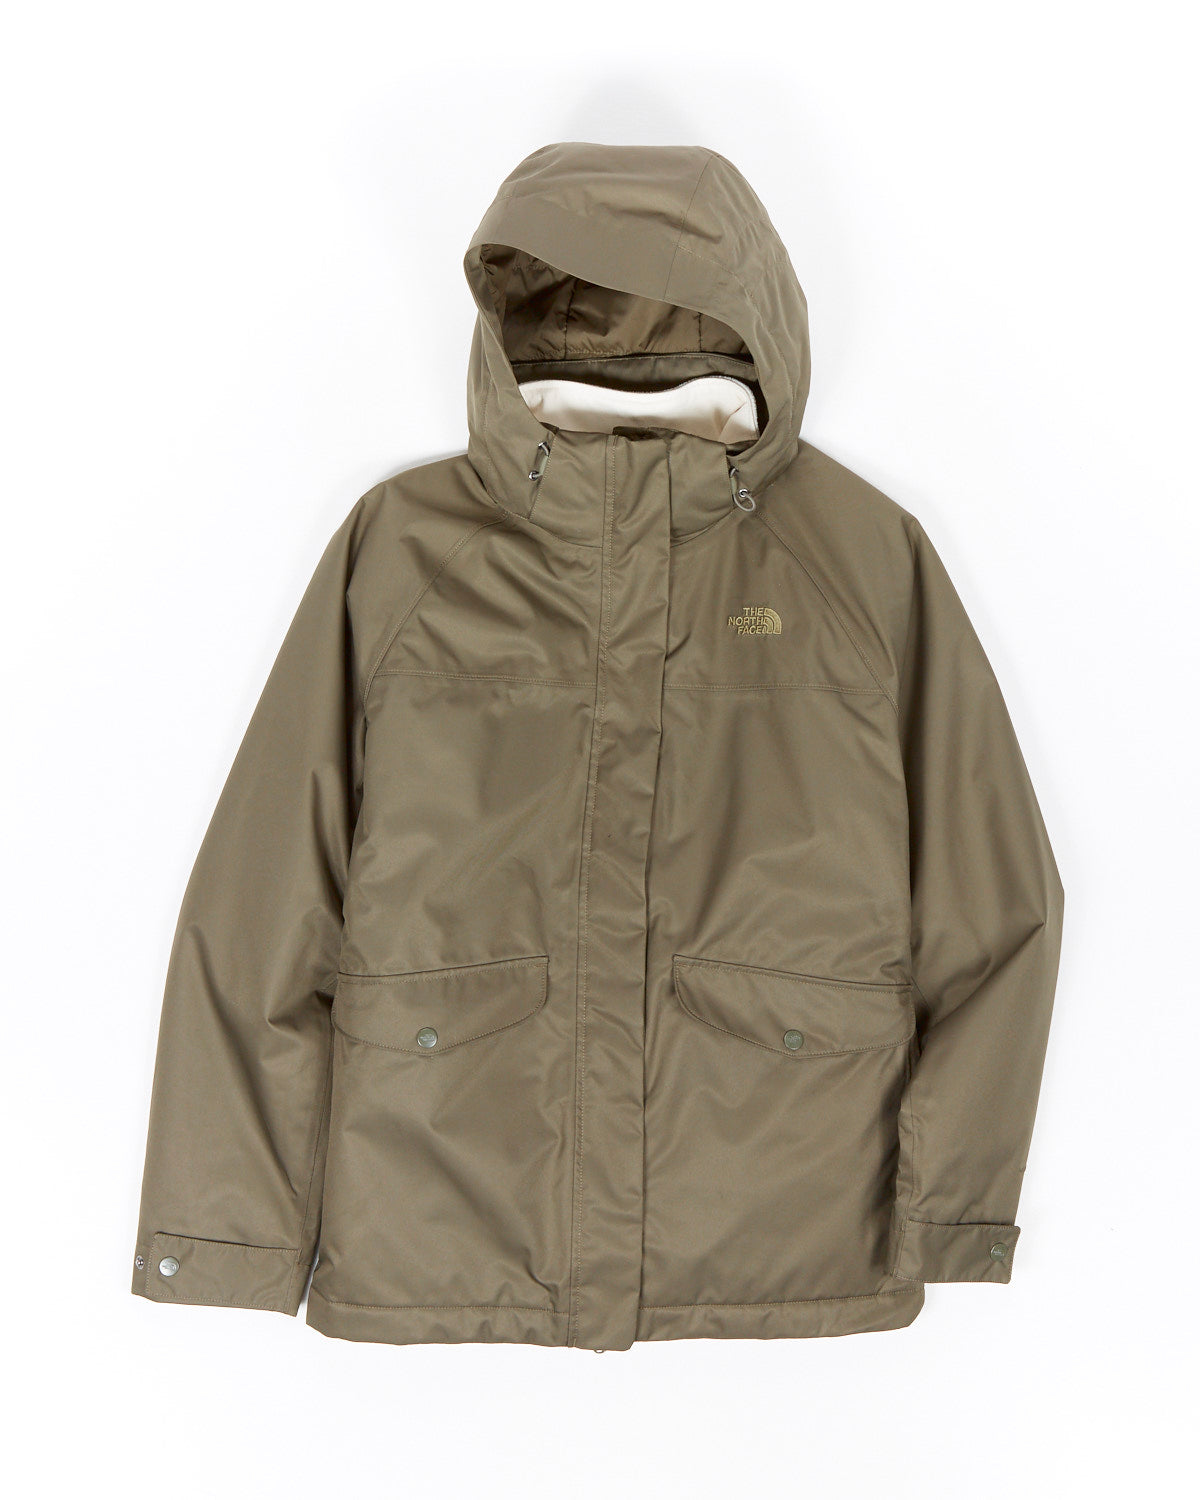 north face merriwood triclimate